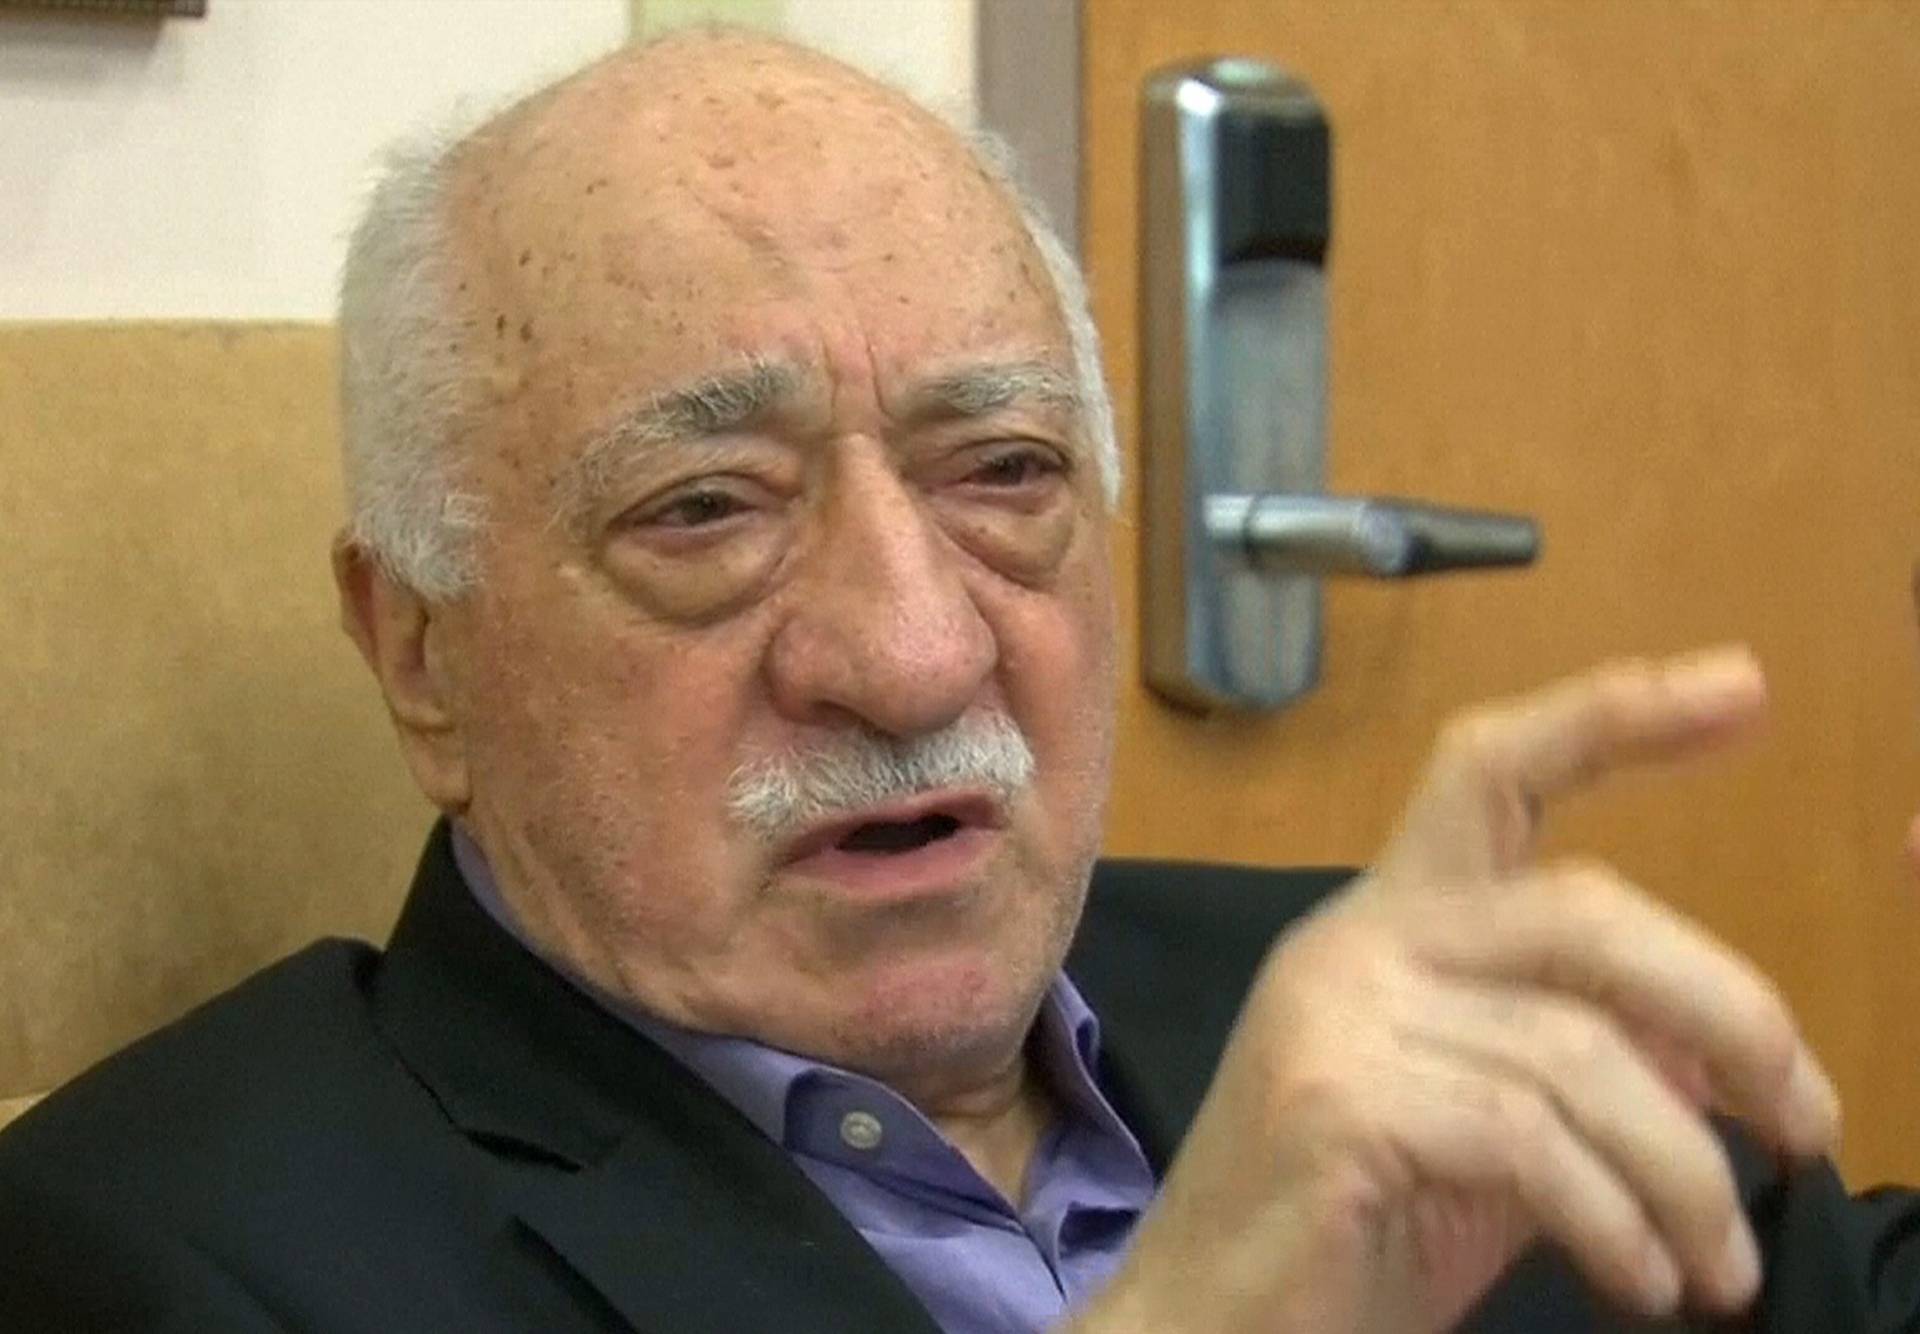 Still image taken from video of U.S.-based cleric Fethullah Gulen, whose followers Turkey blames for a failed coup, speaks to journalists at his home in Saylorsburg